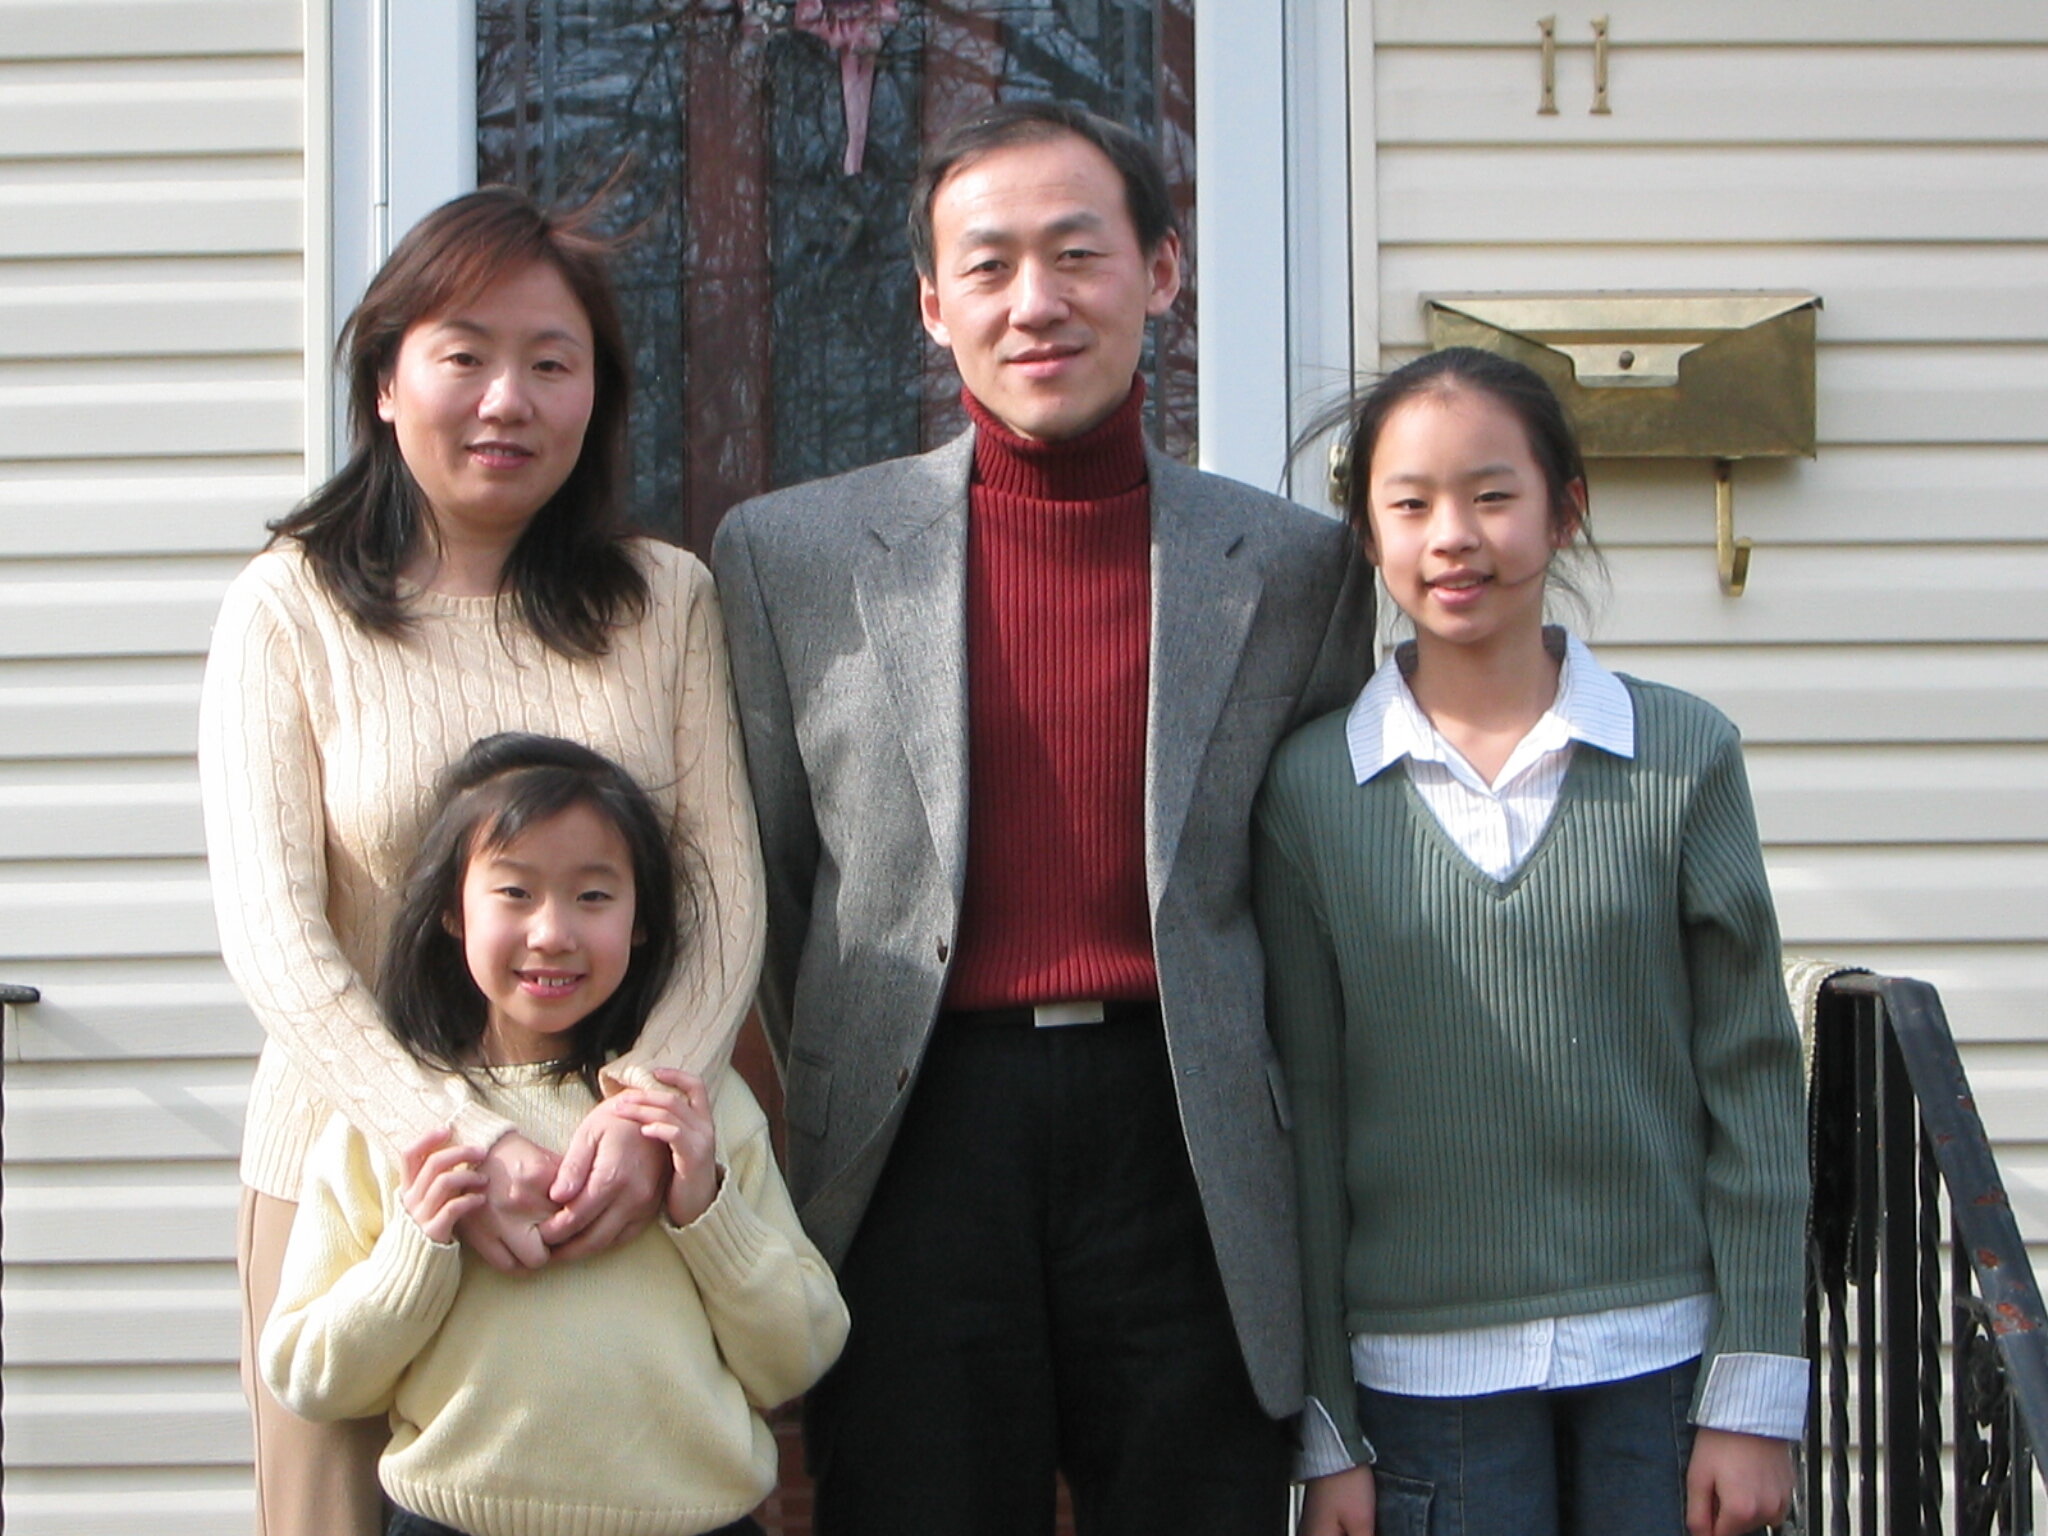  Du Mengxi and her family. Her faith in Christianity made her the envy of her classmates, many of whom found themselves without beliefs. 